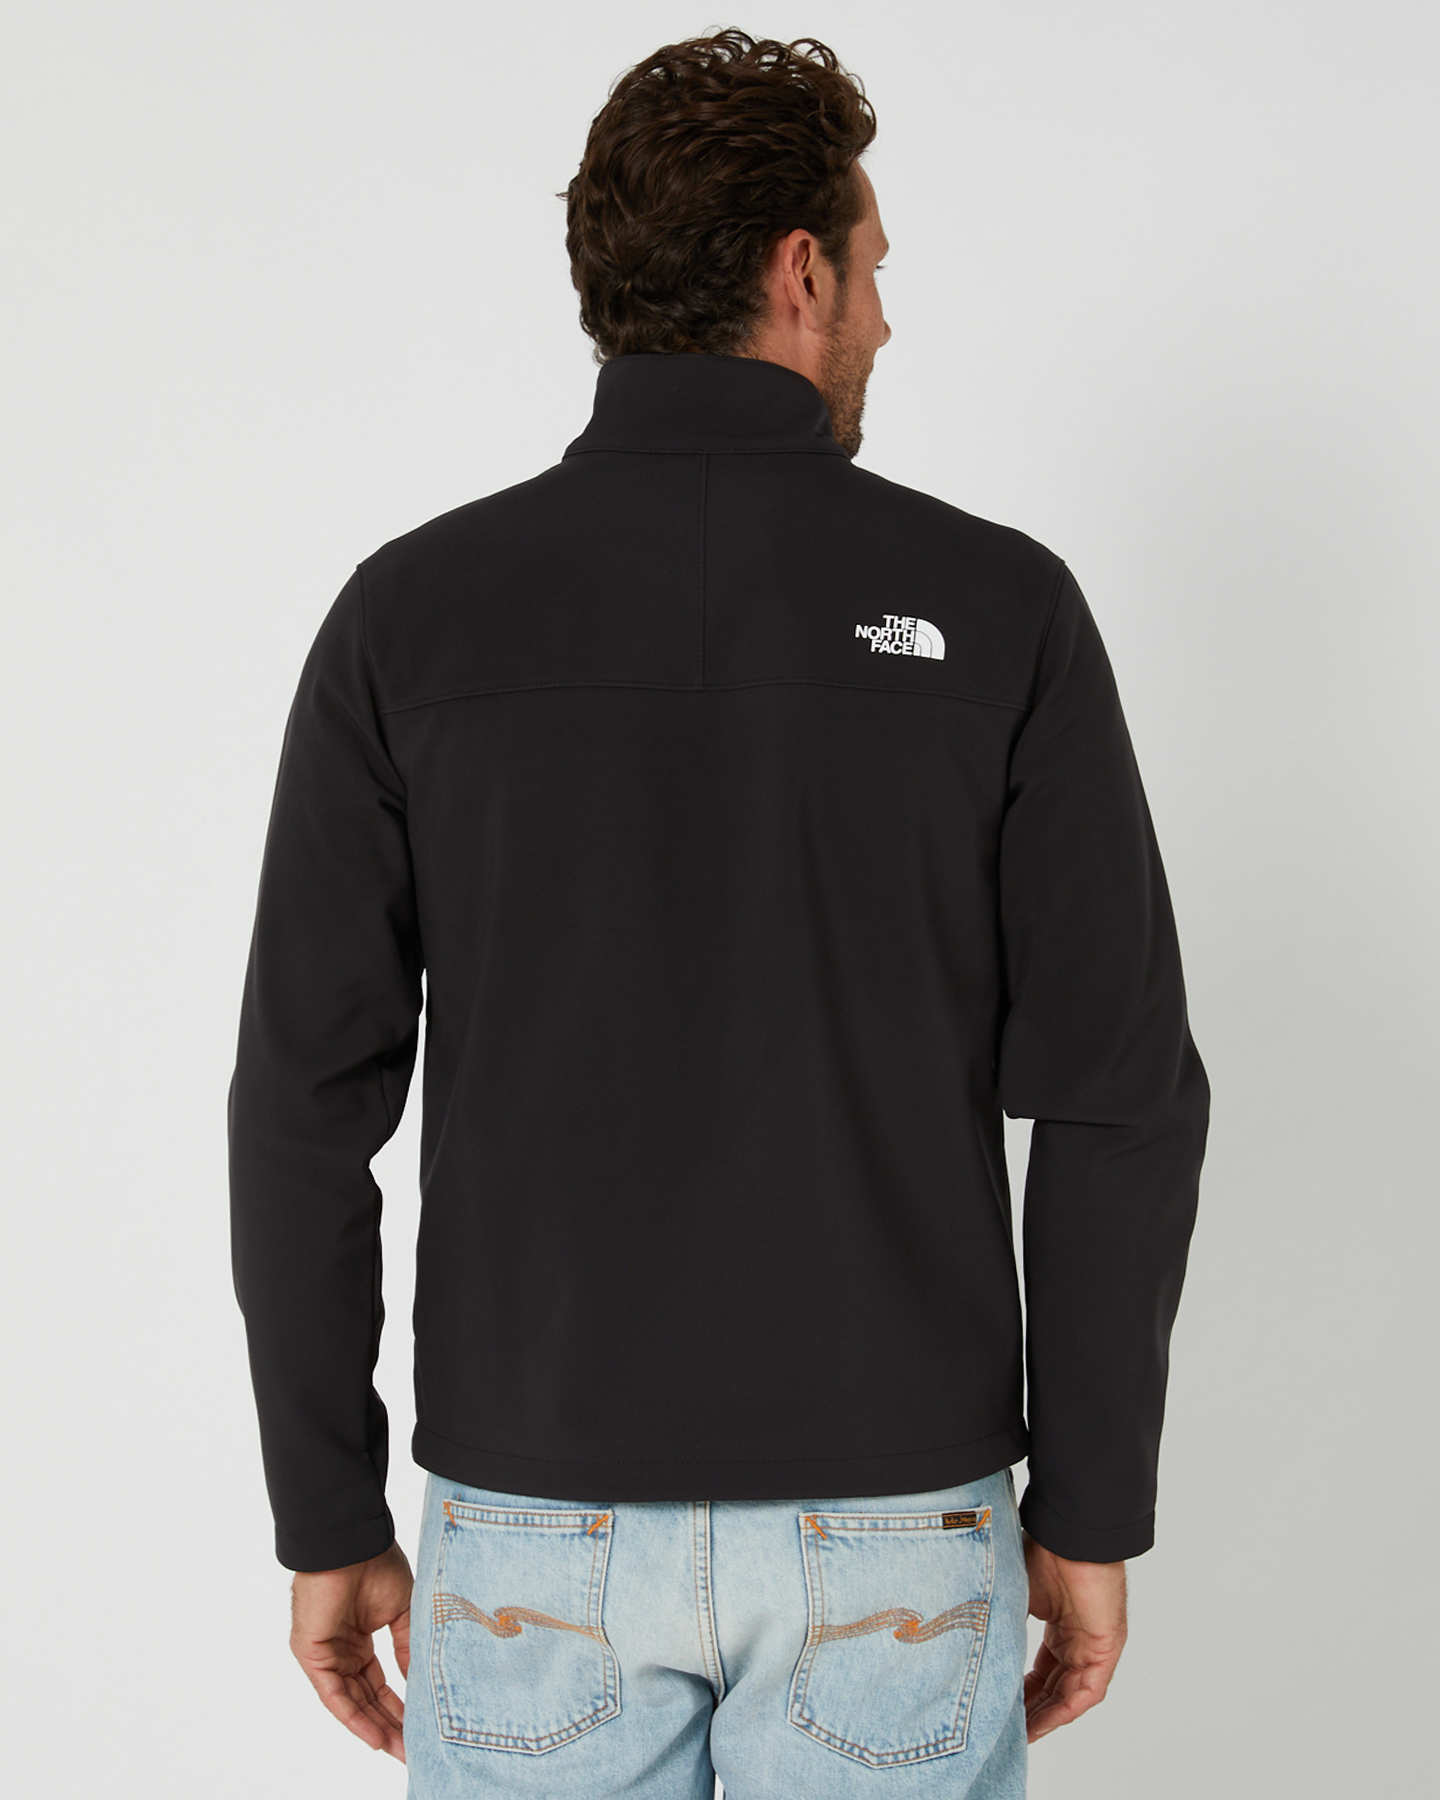 The North Face Apex Bionic 2 Mens Jacket - Tnf Black | SurfStitch